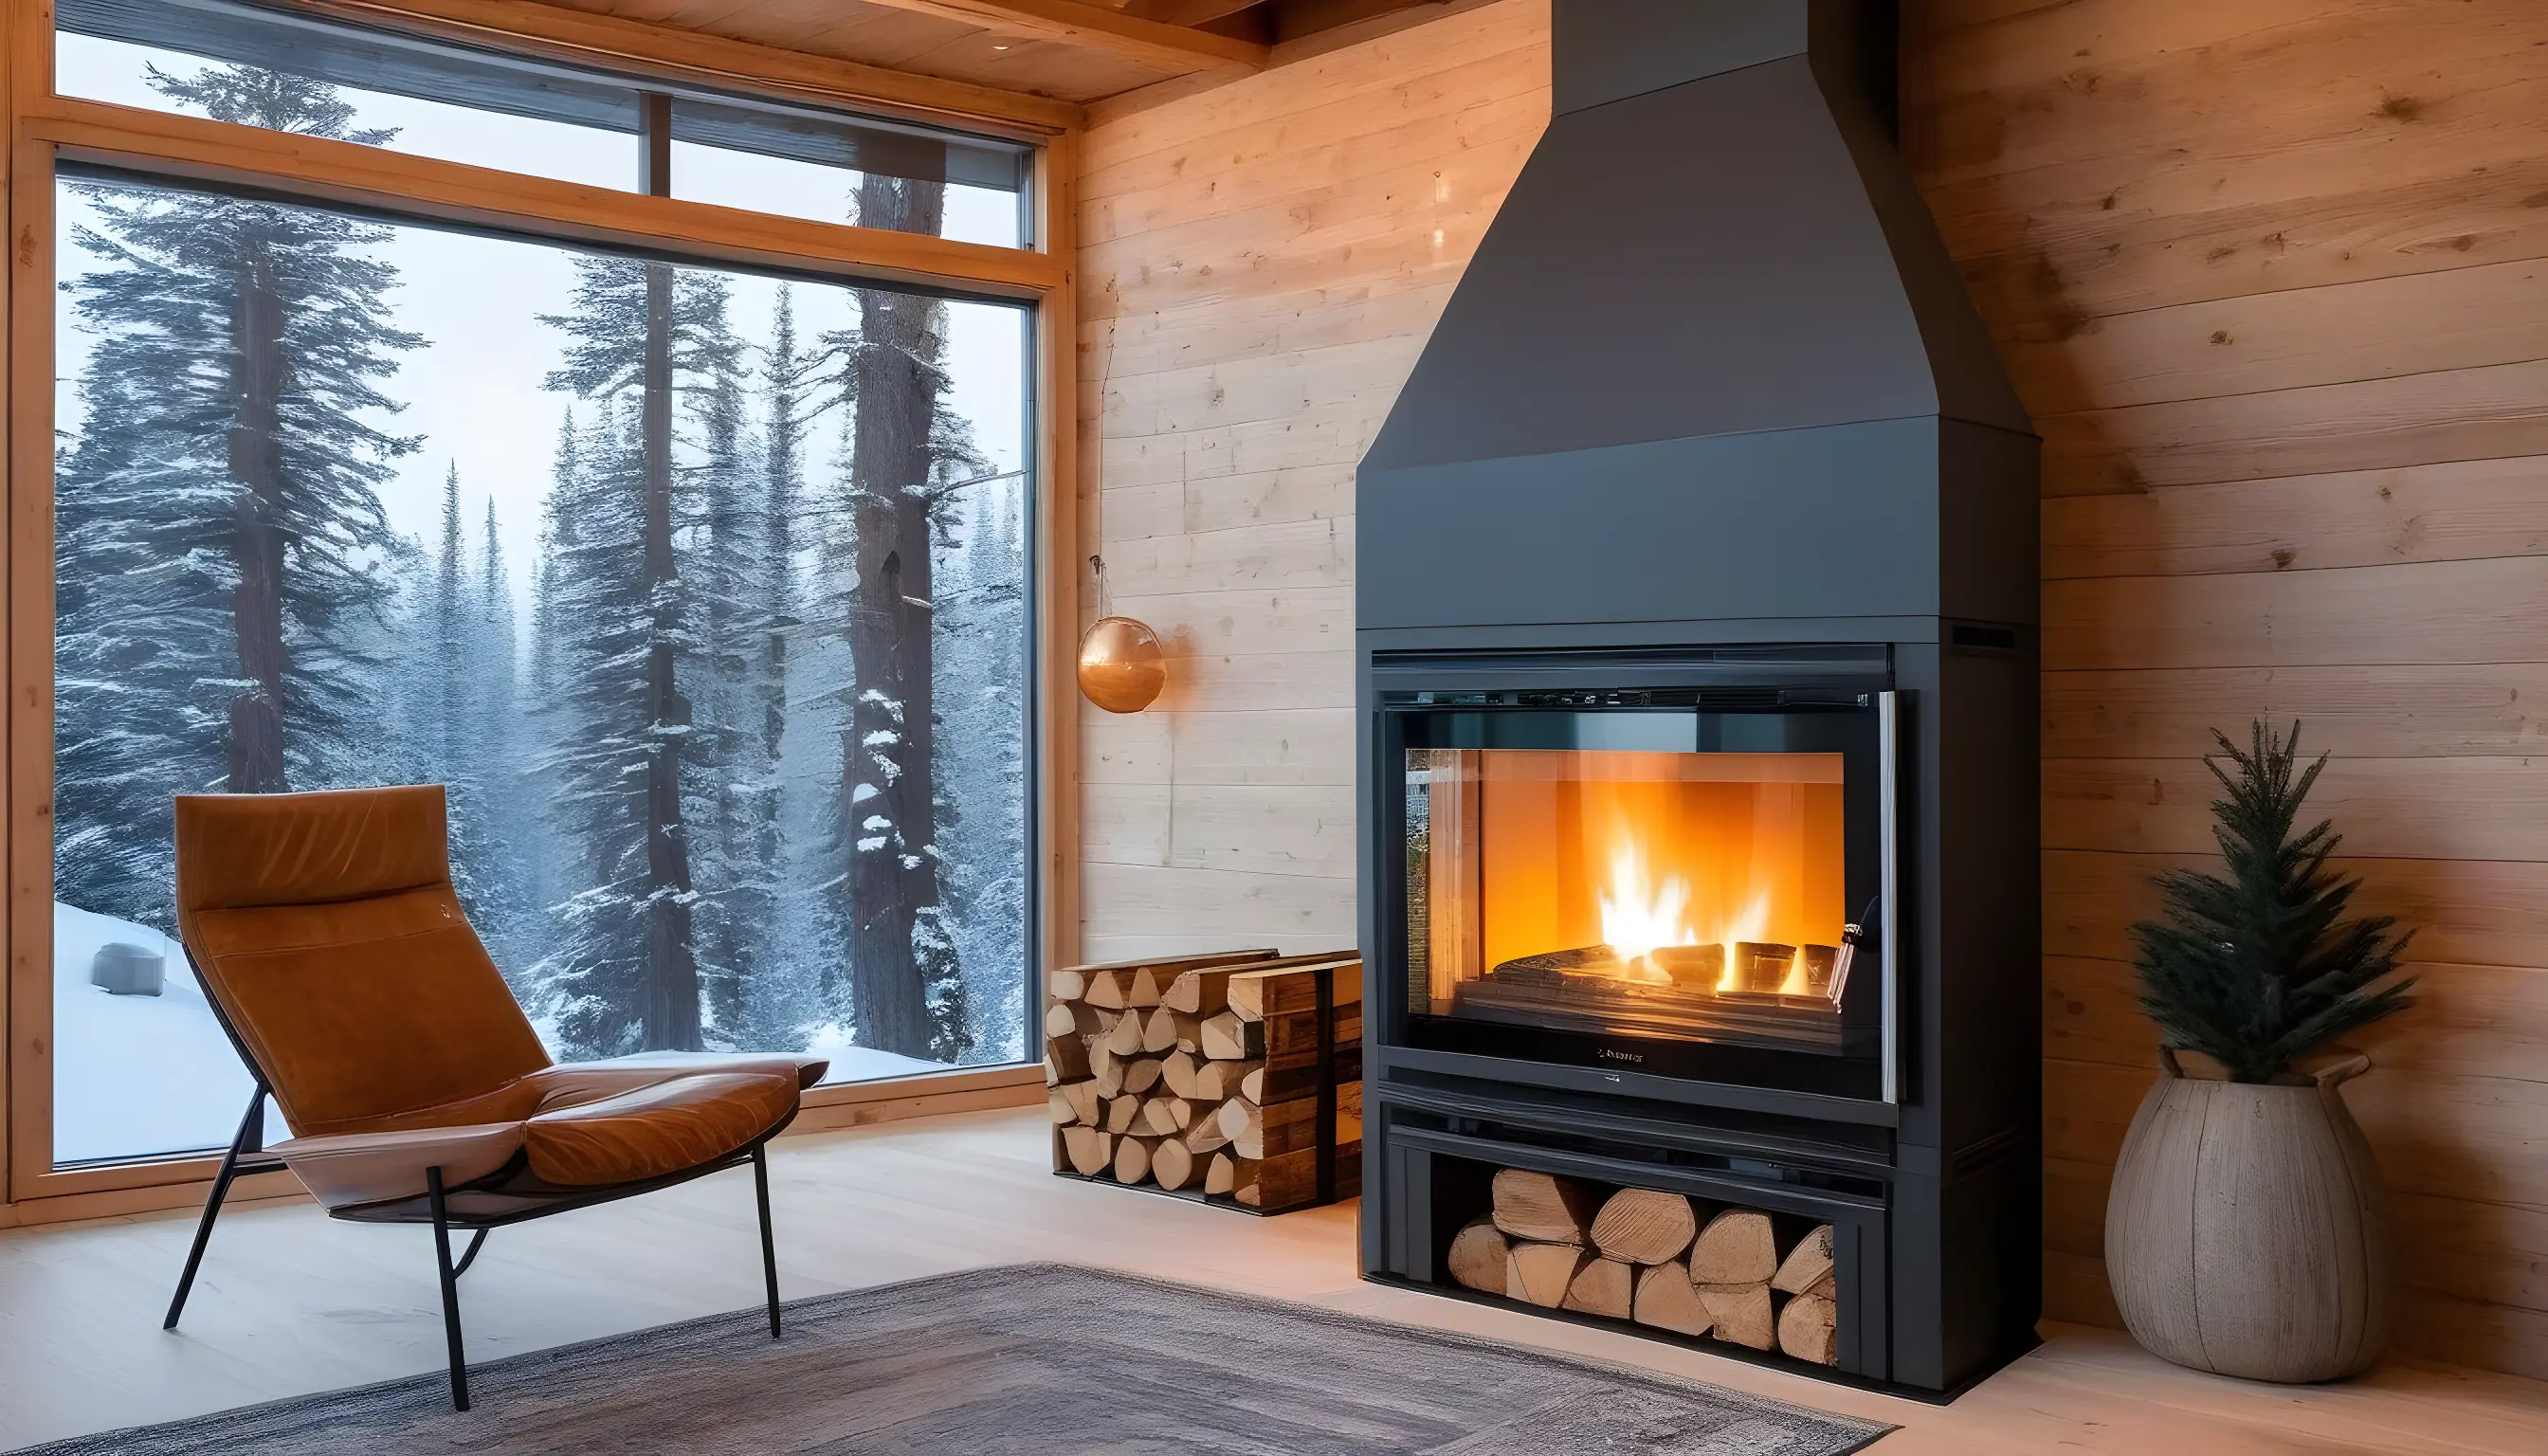 Staying cozy and Eco-Friendly in Winter season